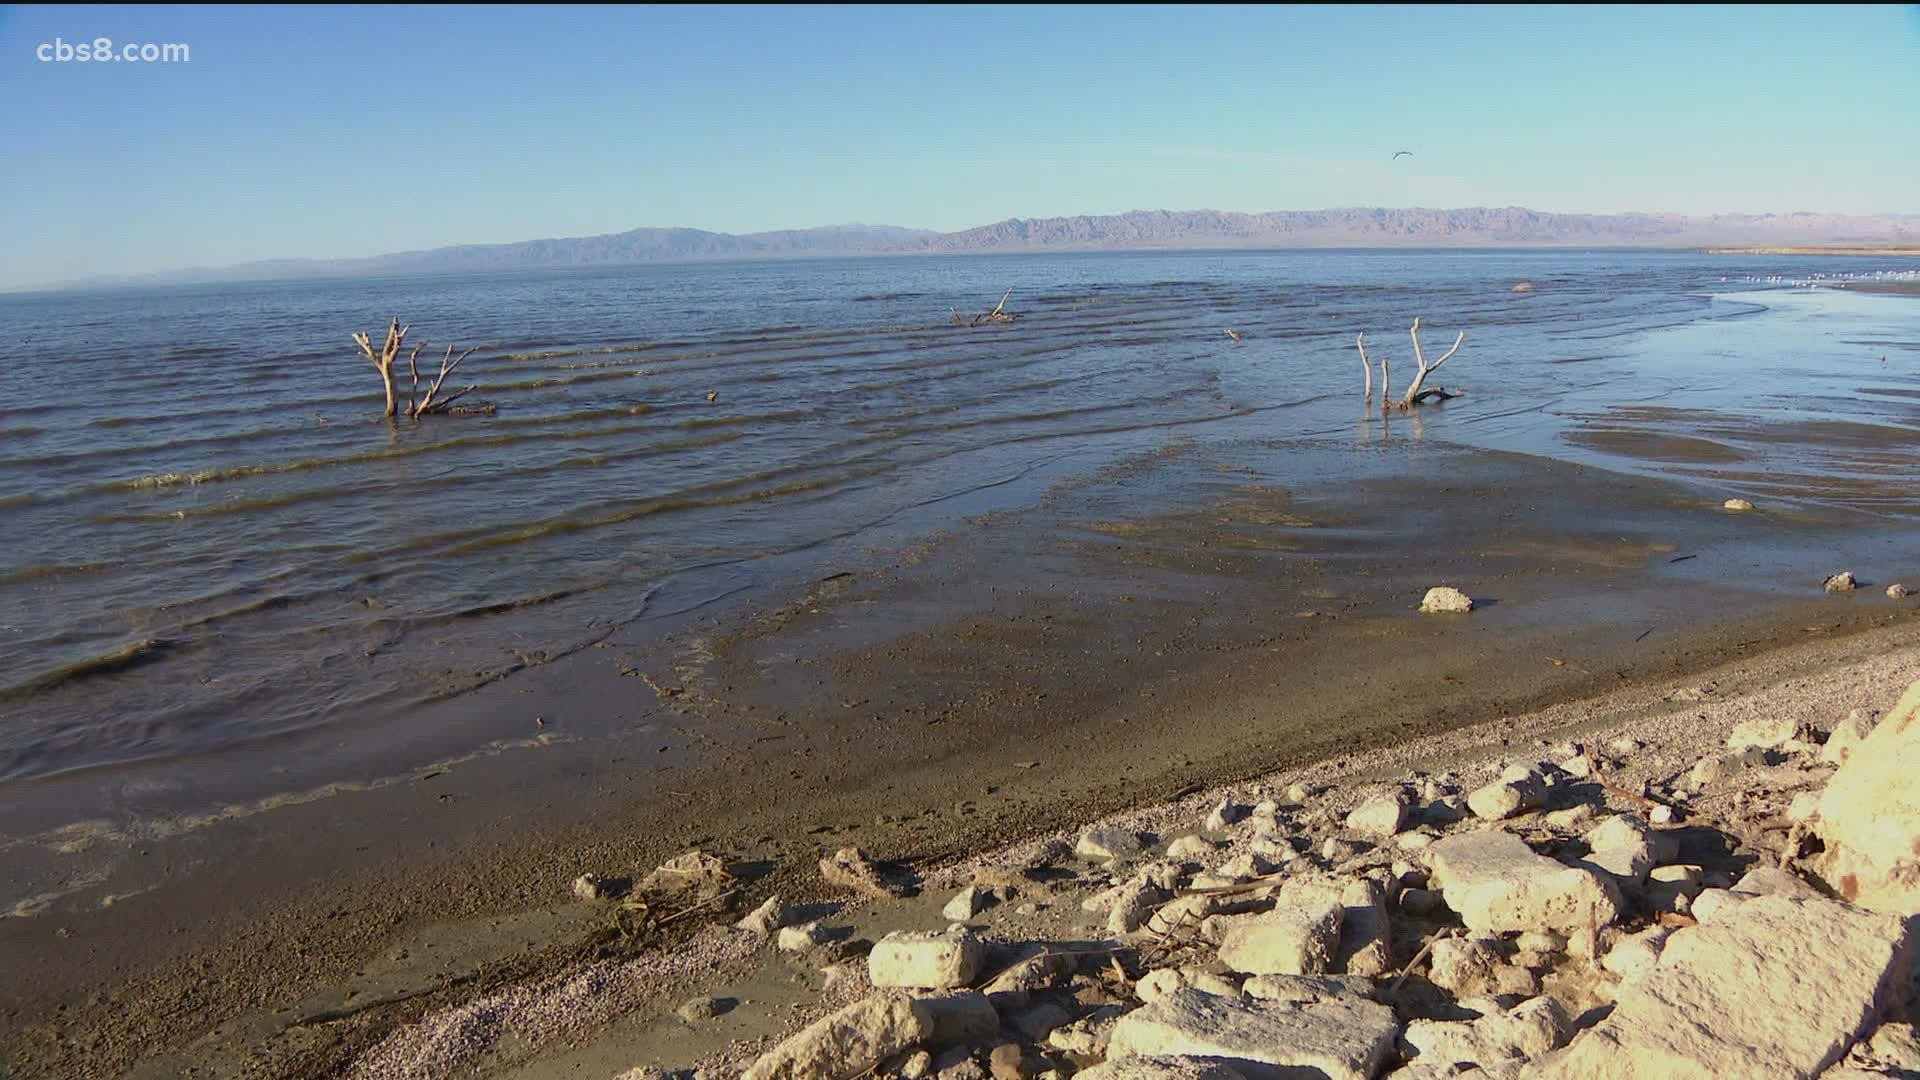 Eight thousand feet below the Salton Sea is a chemical that some call “white gold”.